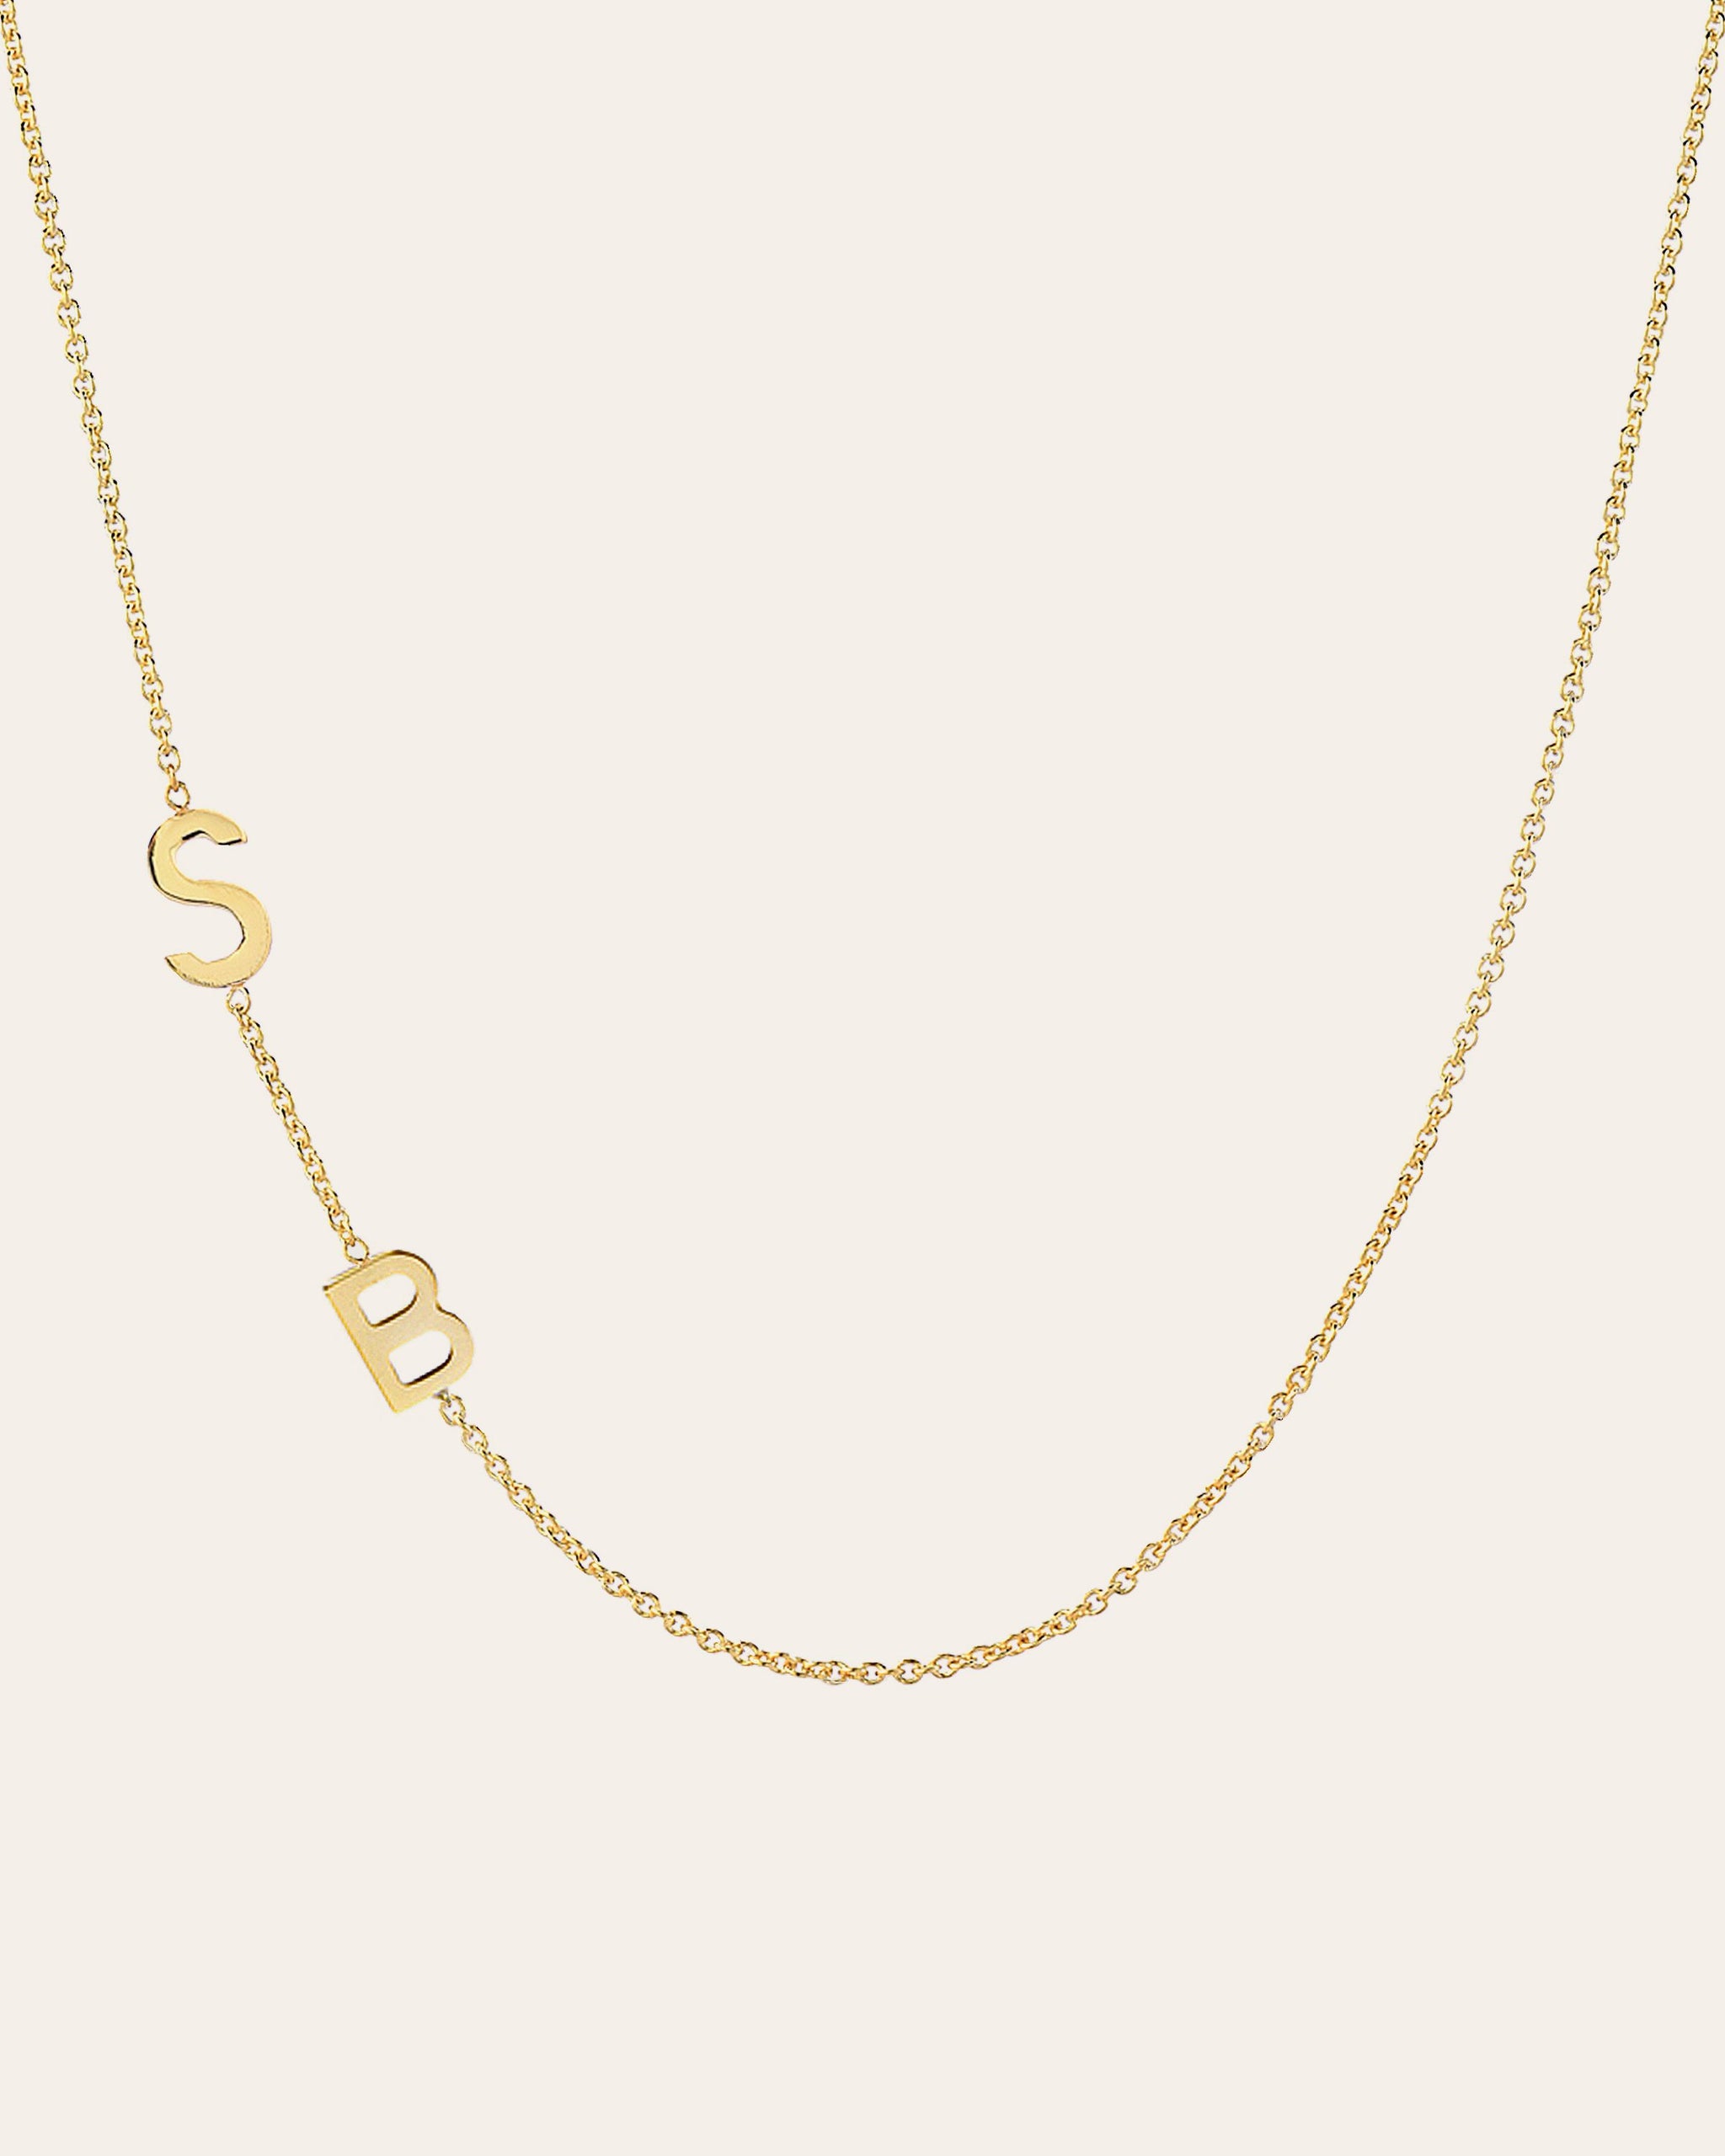 Zoe Lev Jewelry - 14k Gold Asymmetrical Multiple Initials Necklace